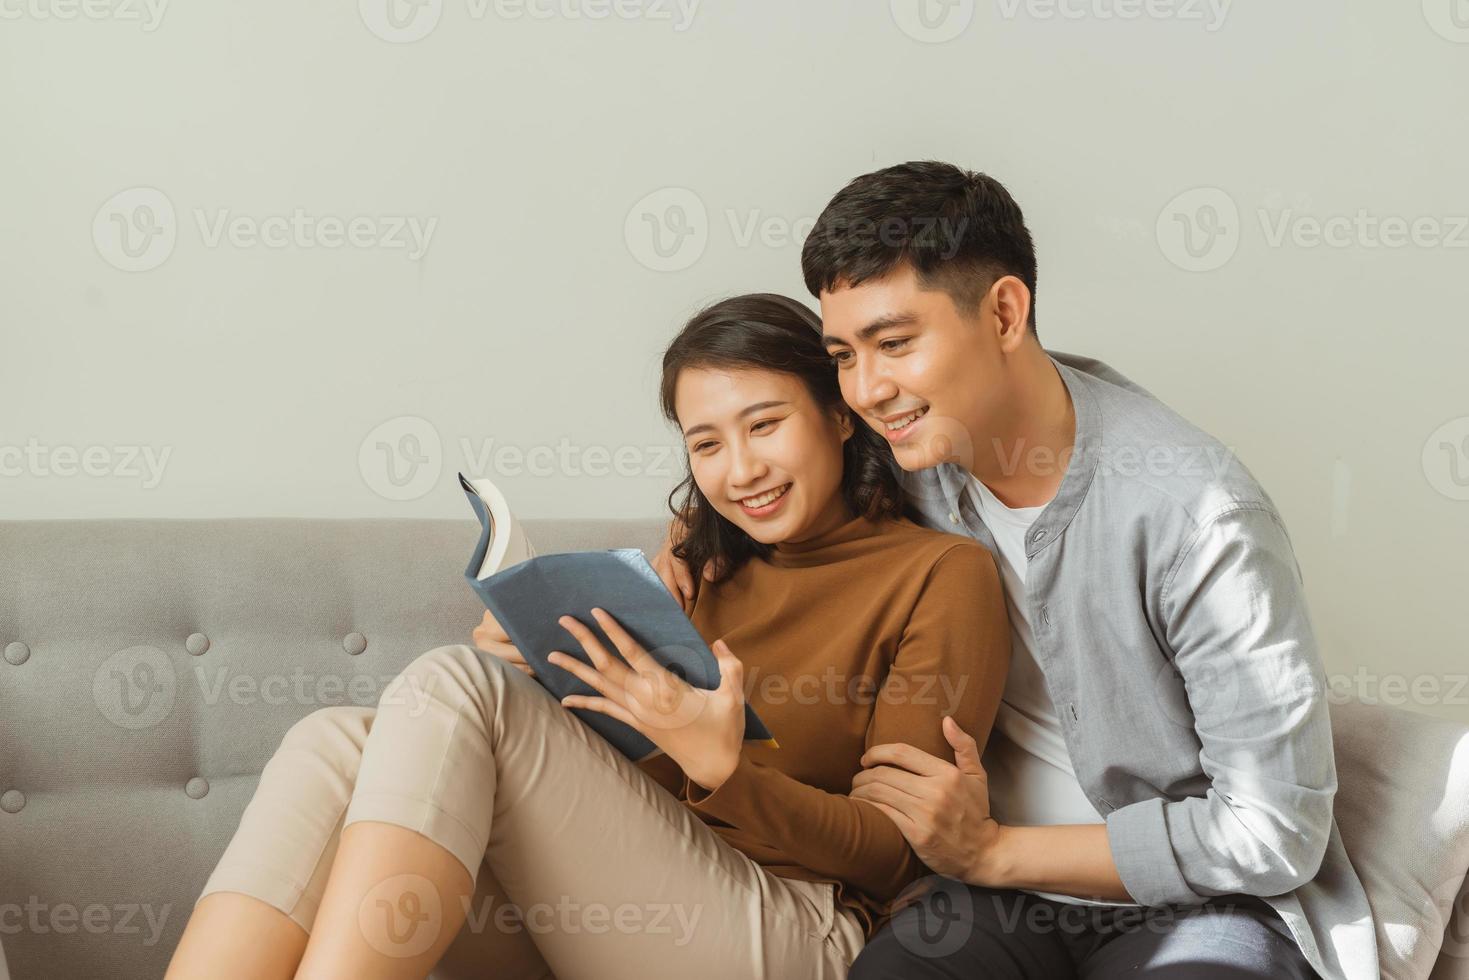 smiling romantic couple riding from the same book photo